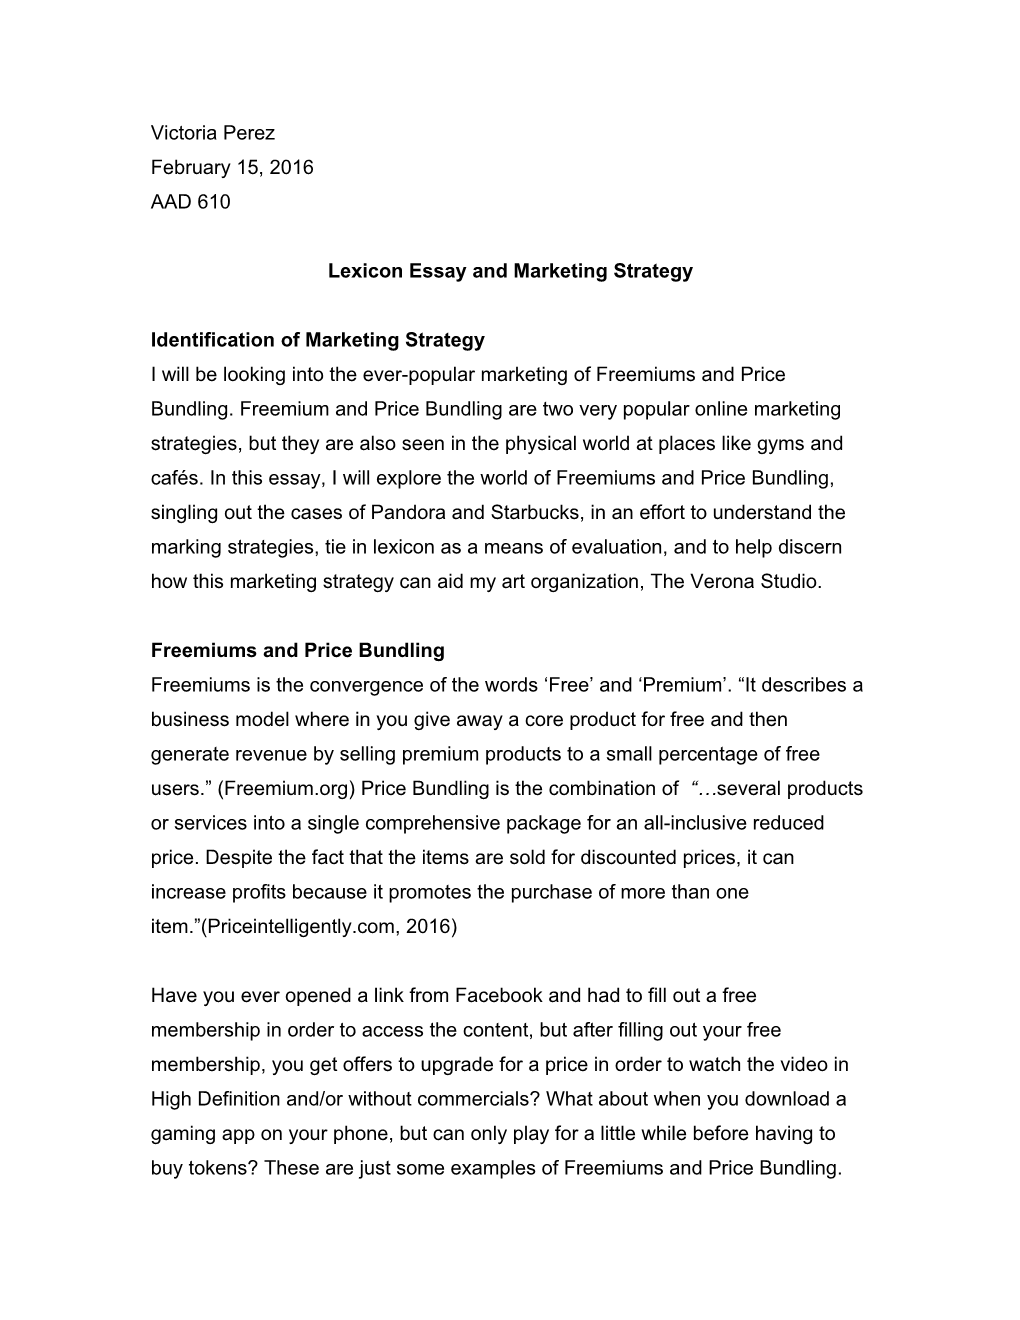 Lexicon Essay and Marketing Strategy